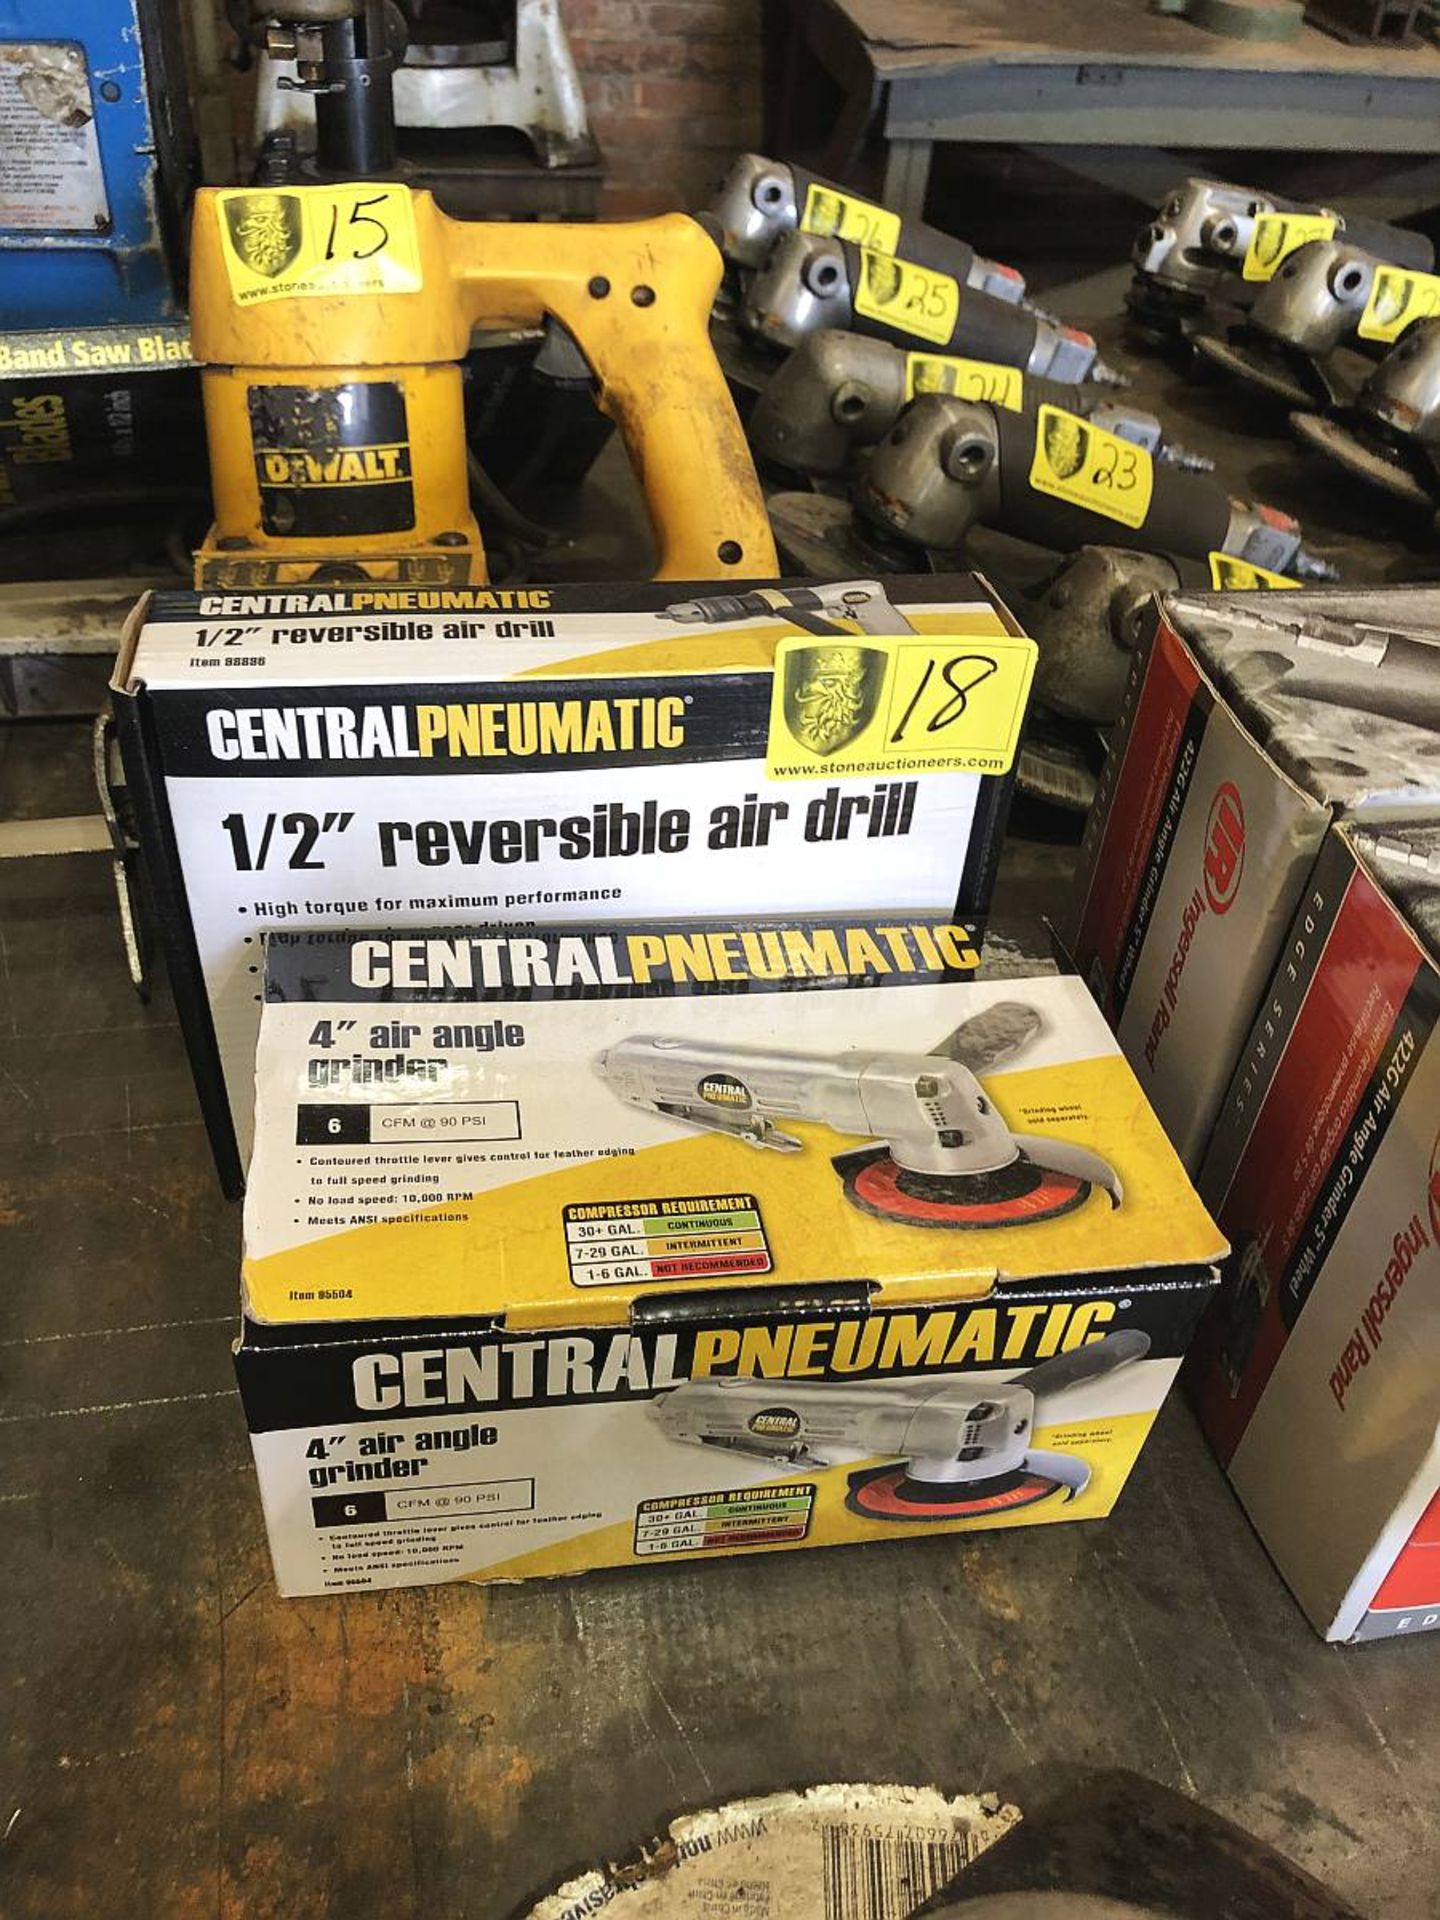 NEW Central Pneumatic Tools including: 1/2" Reversible Air Drill & 4" Air Angle Grinder